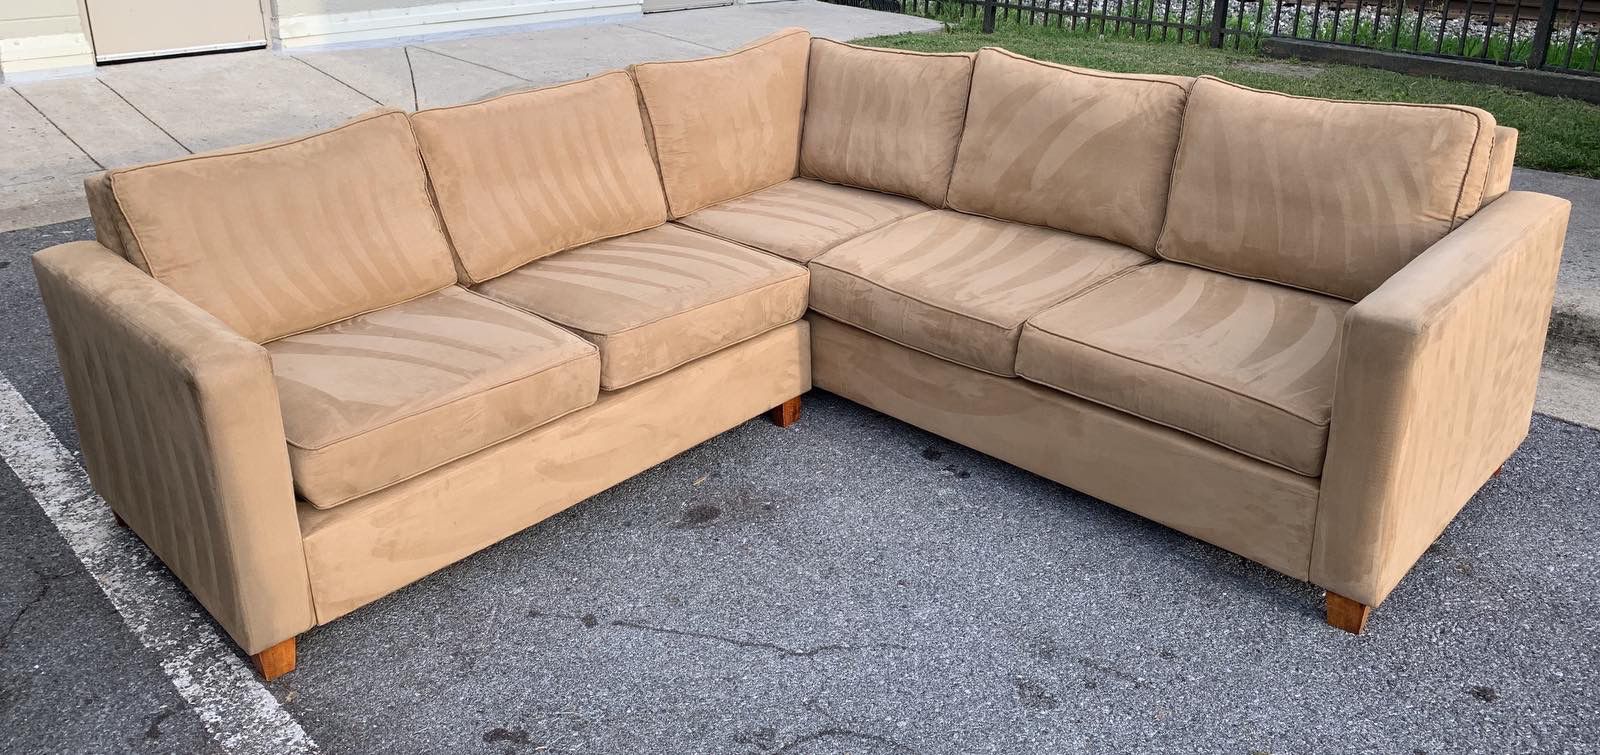 Sectional sofa delivery available